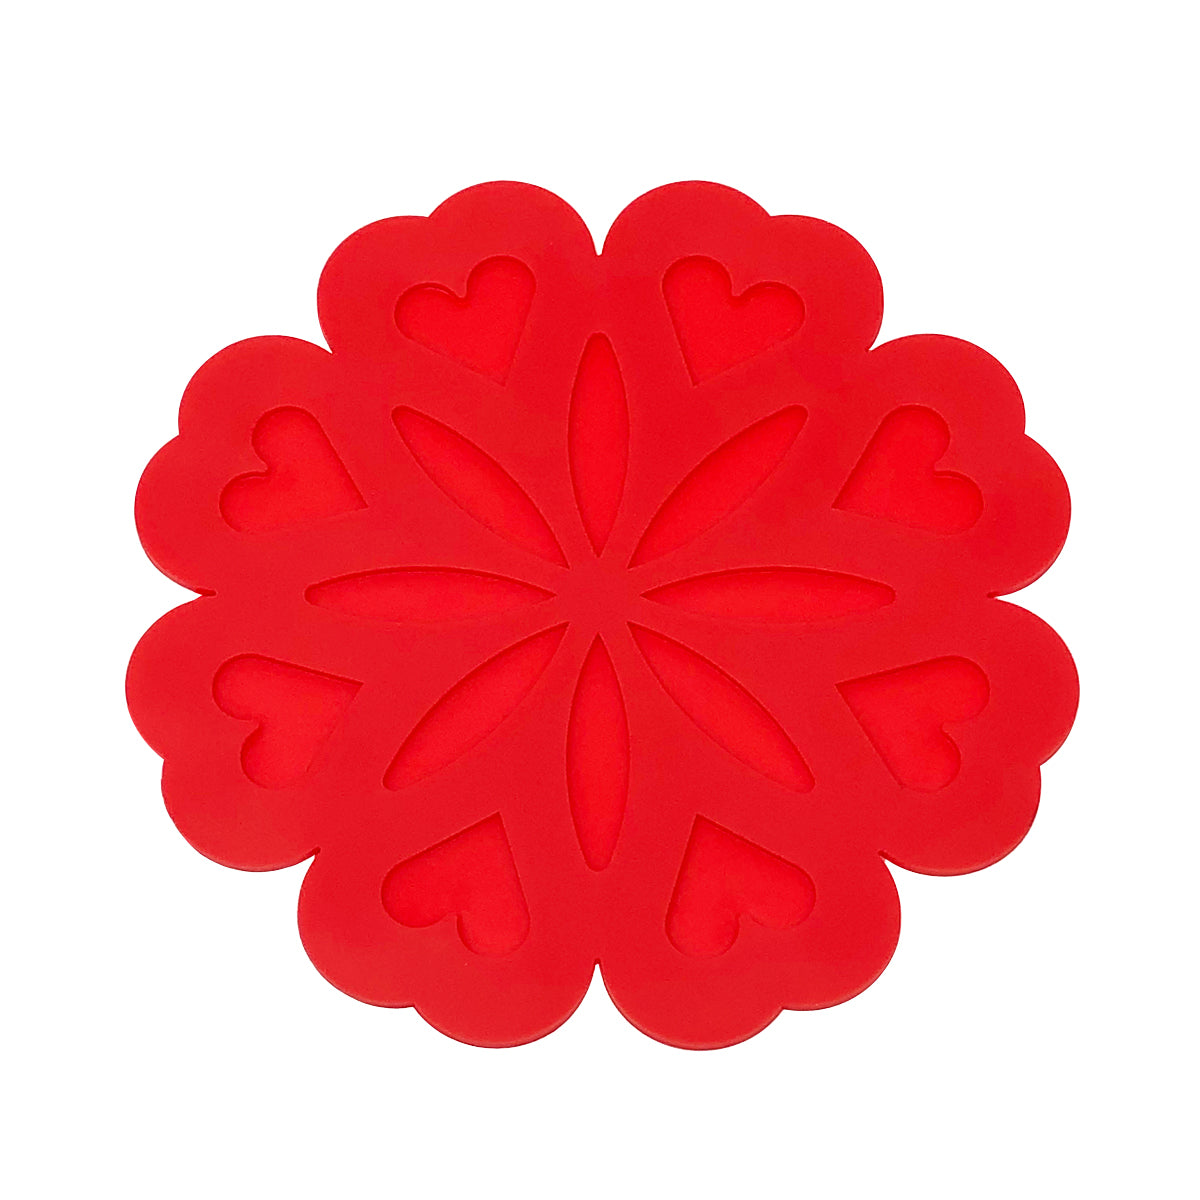 Wrapables Silicone Pot Holders, Multi-Use Durable Flexible Non-Slip Insulated Silicone Trivet (Set of 4) Red